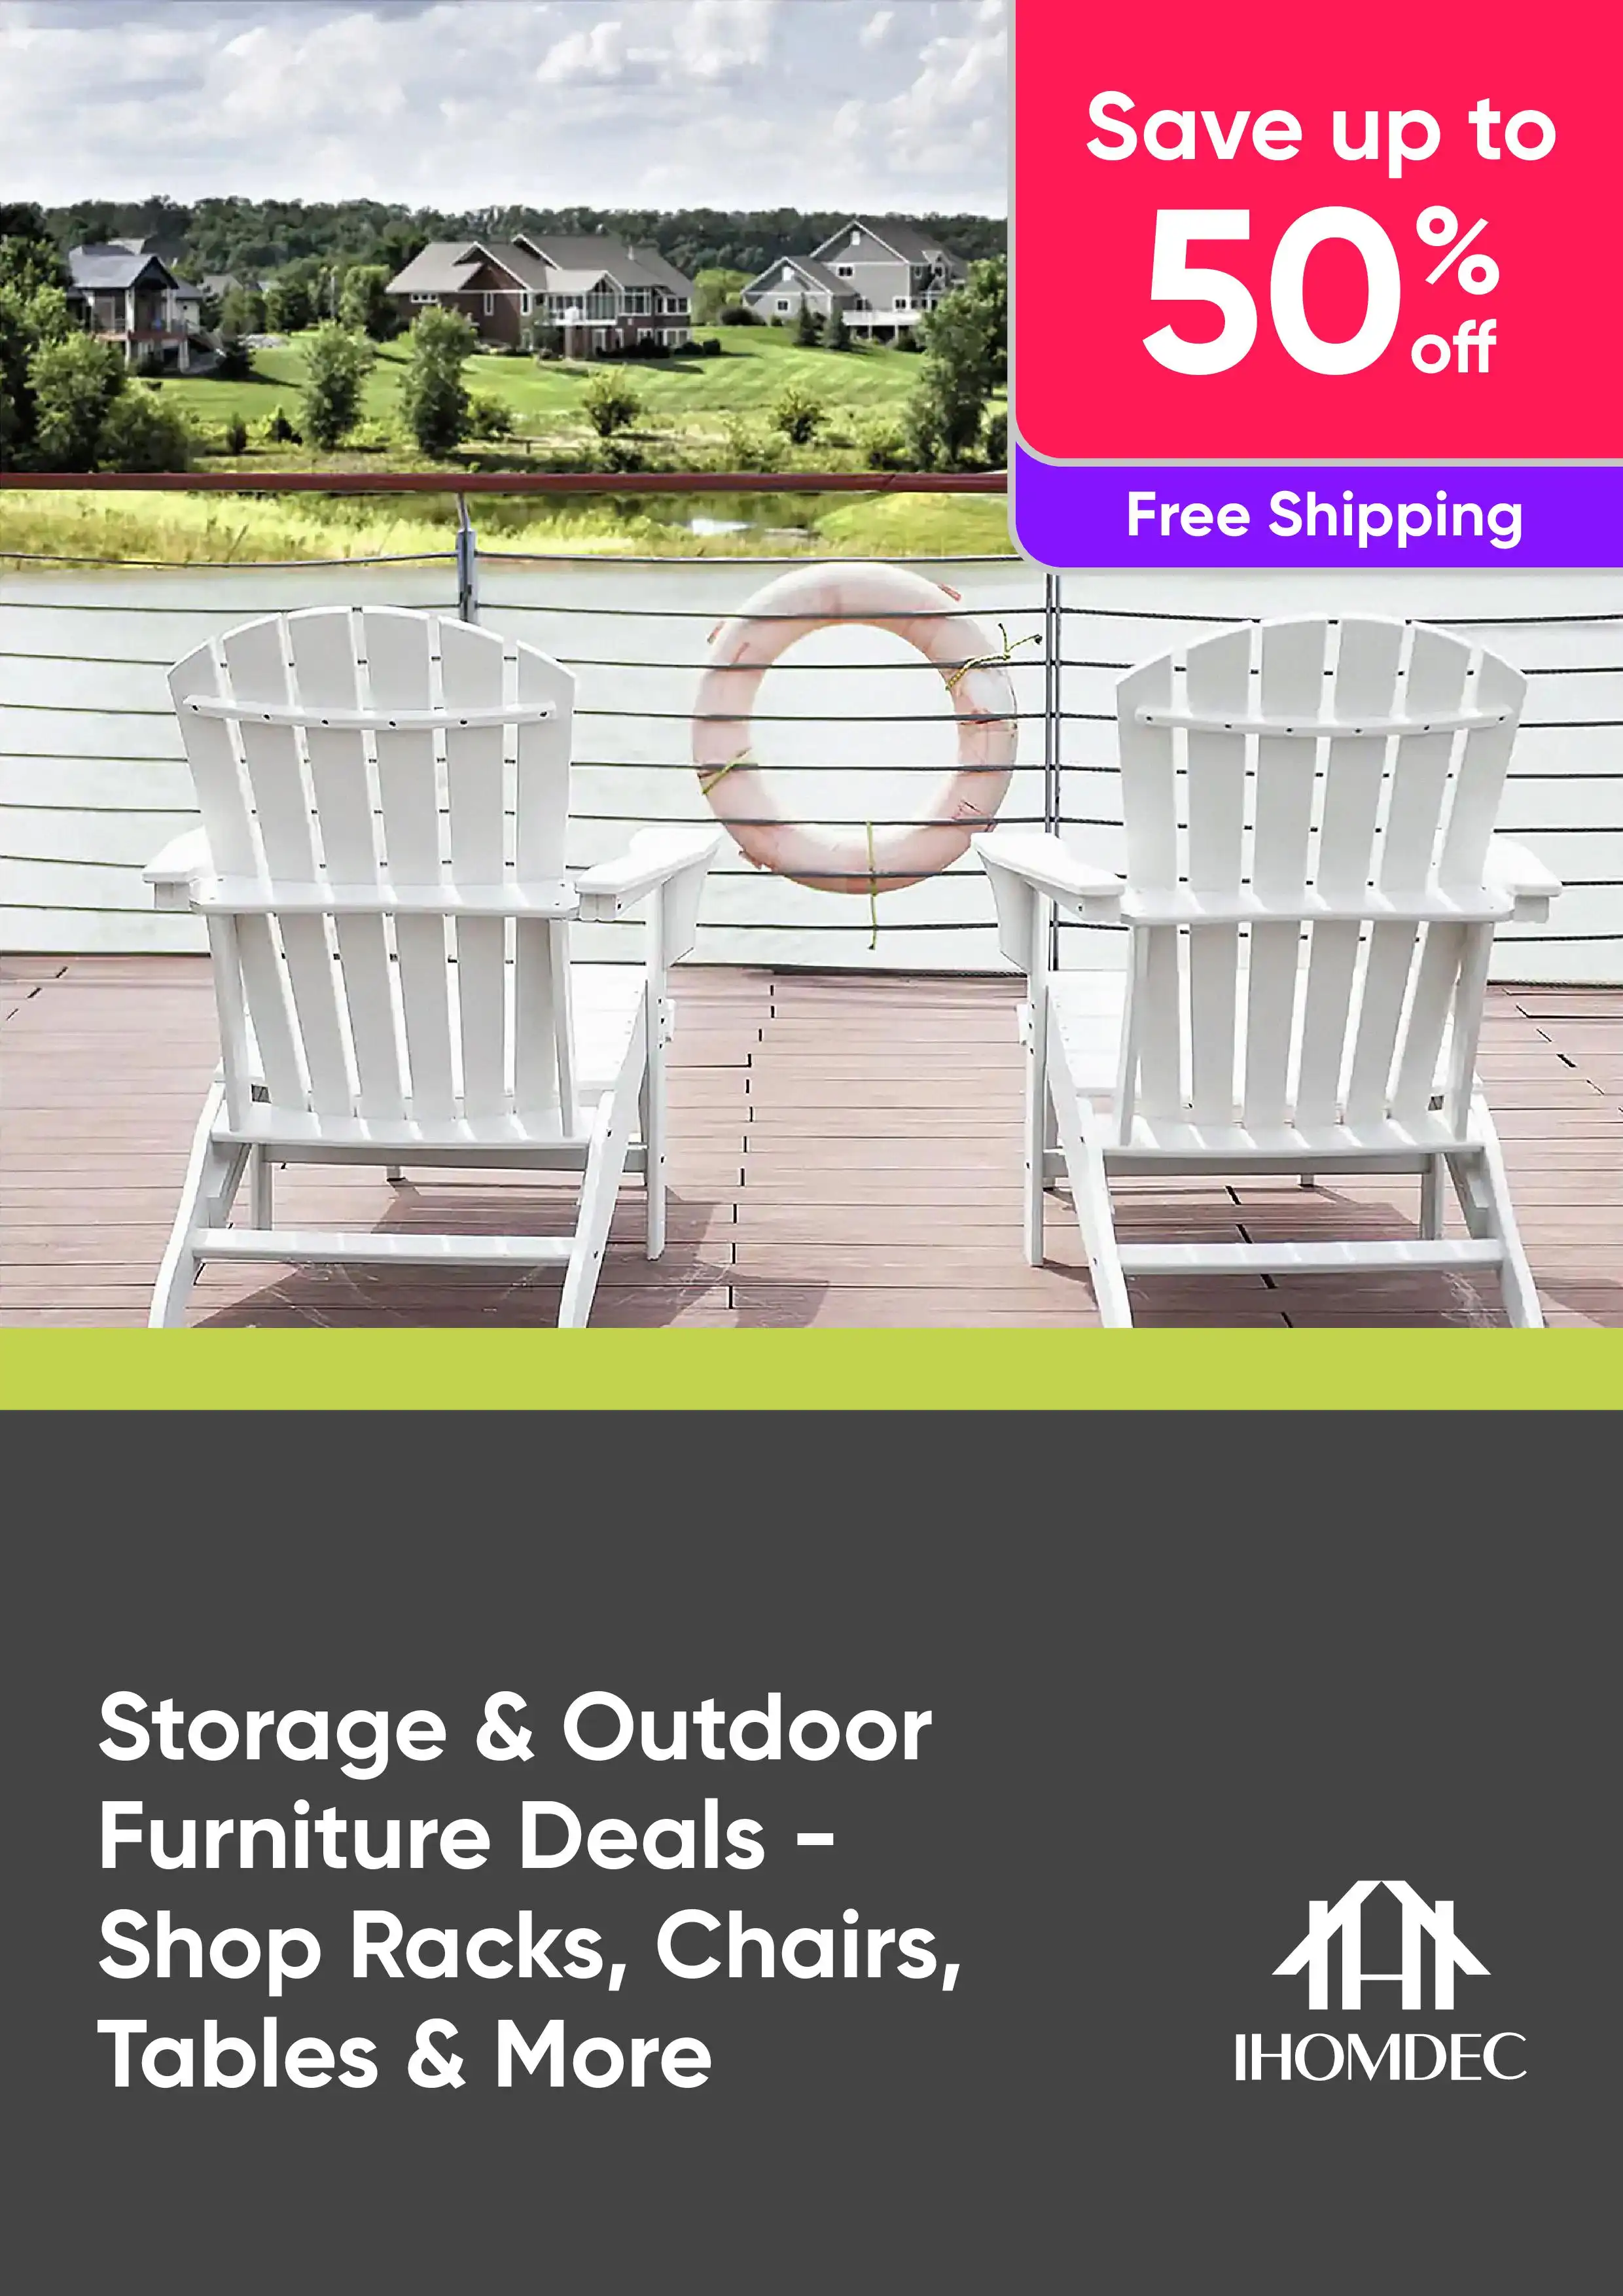 Storage & Outdoor Furniture Deals - Shop Racks, Chairs, Tables and More up to 50% Off RRP